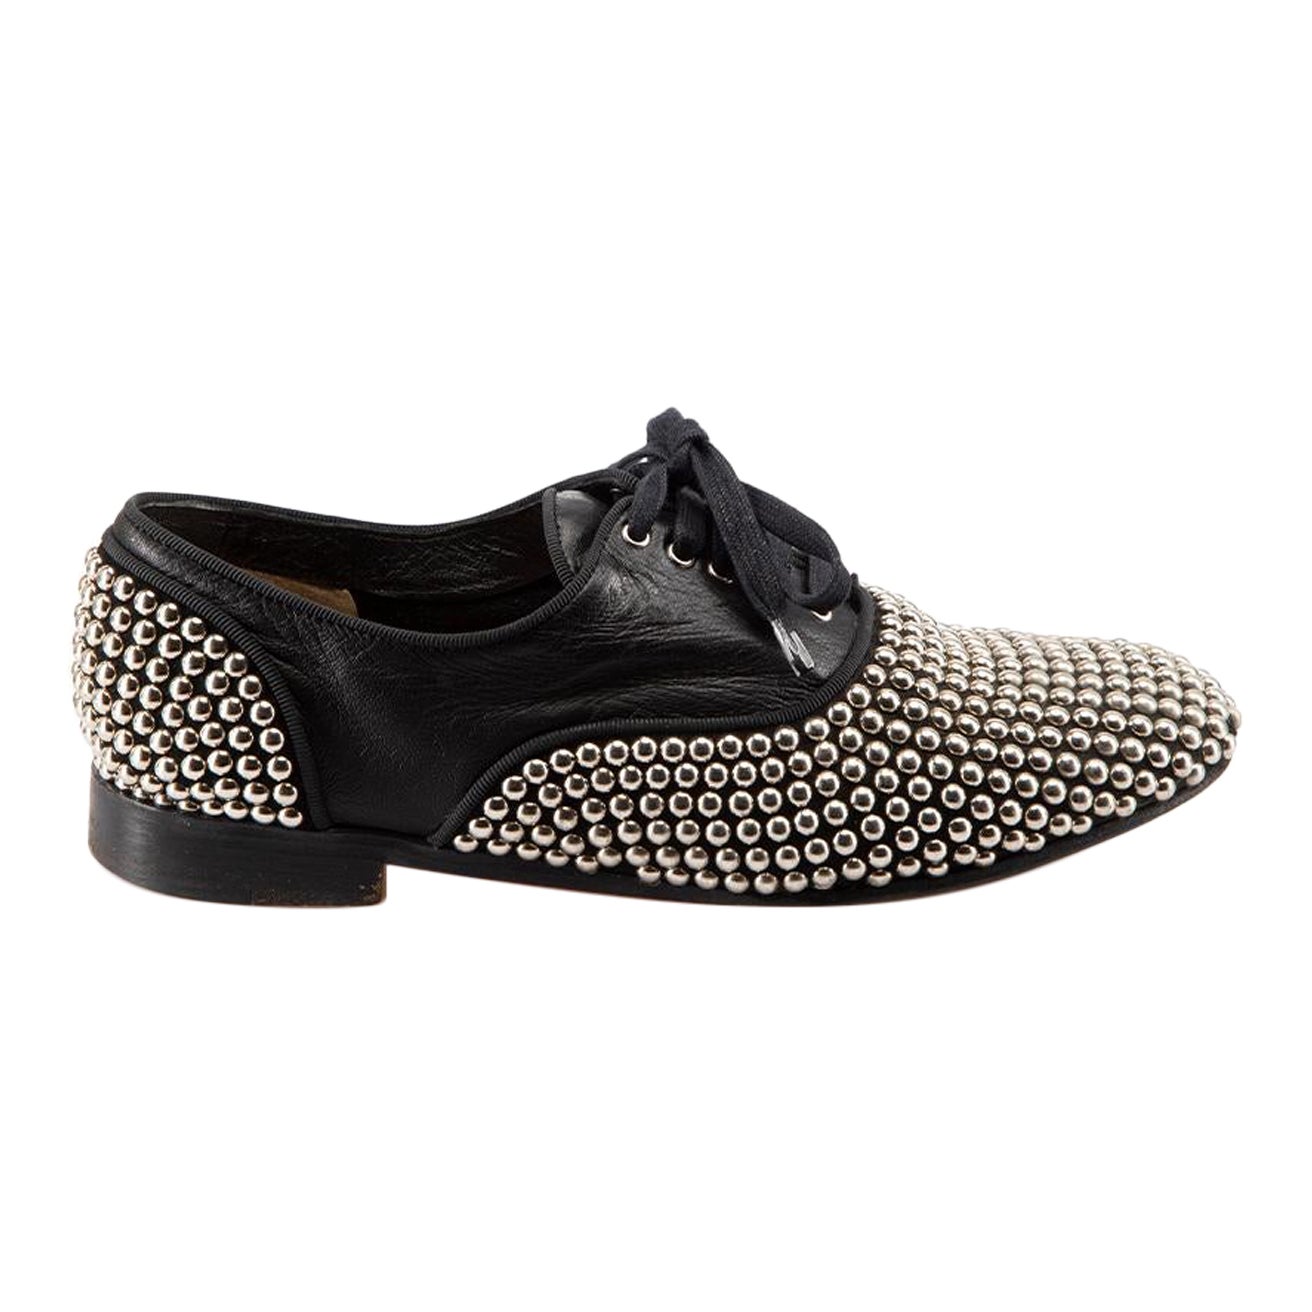 Christian Louboutin Black Fred Clous Studded Oxfords Size IT 36 For Sale